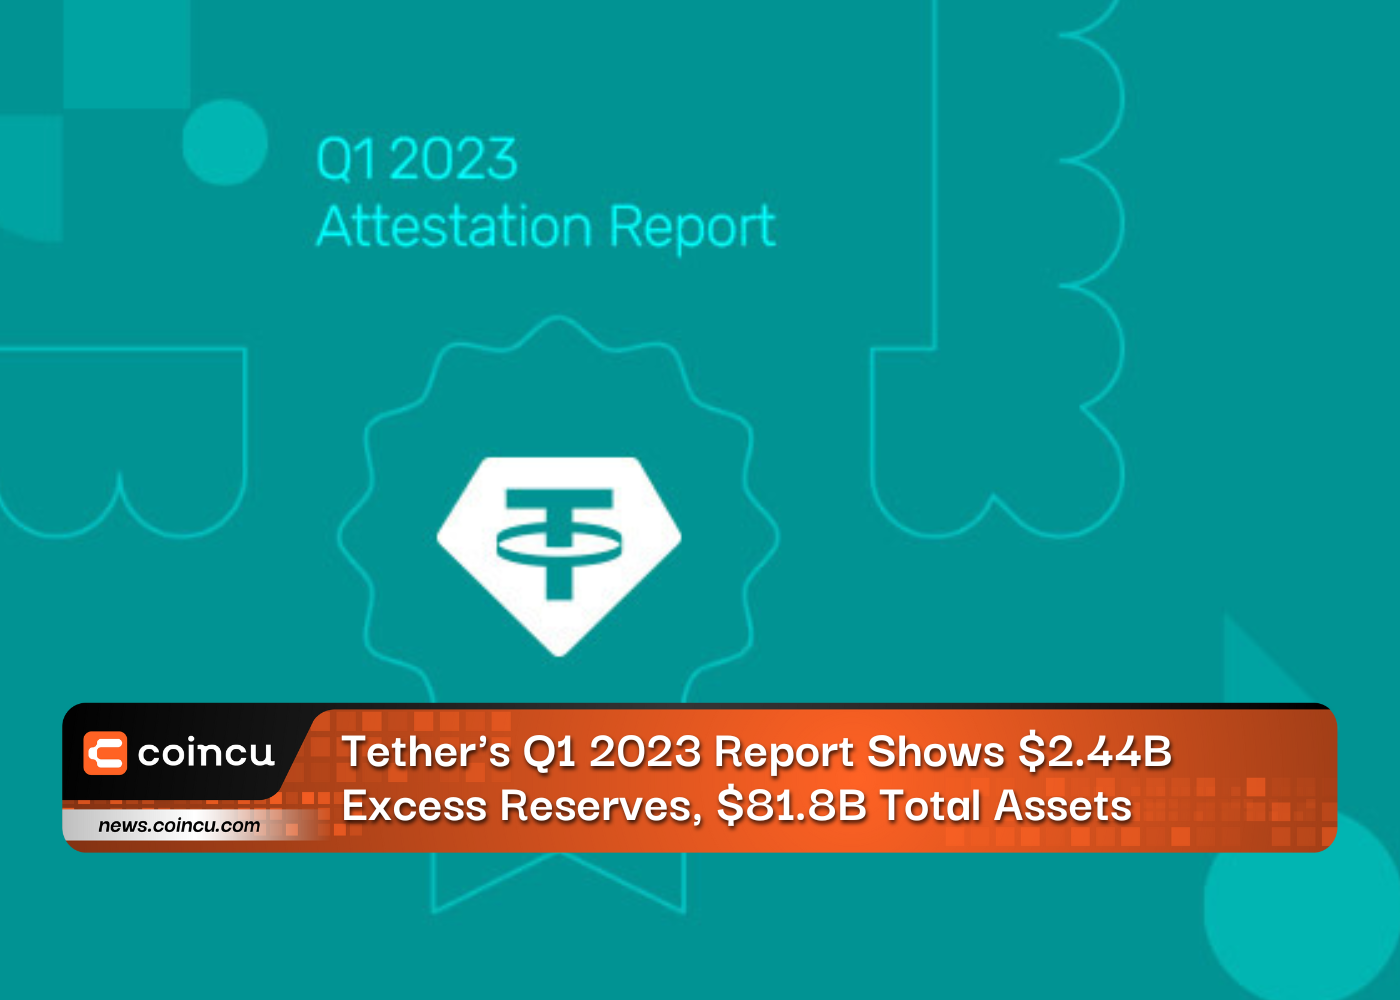 Tether's Q1 2023 Report Shows $2.44B Excess Reserves, $81.8B Total Assets